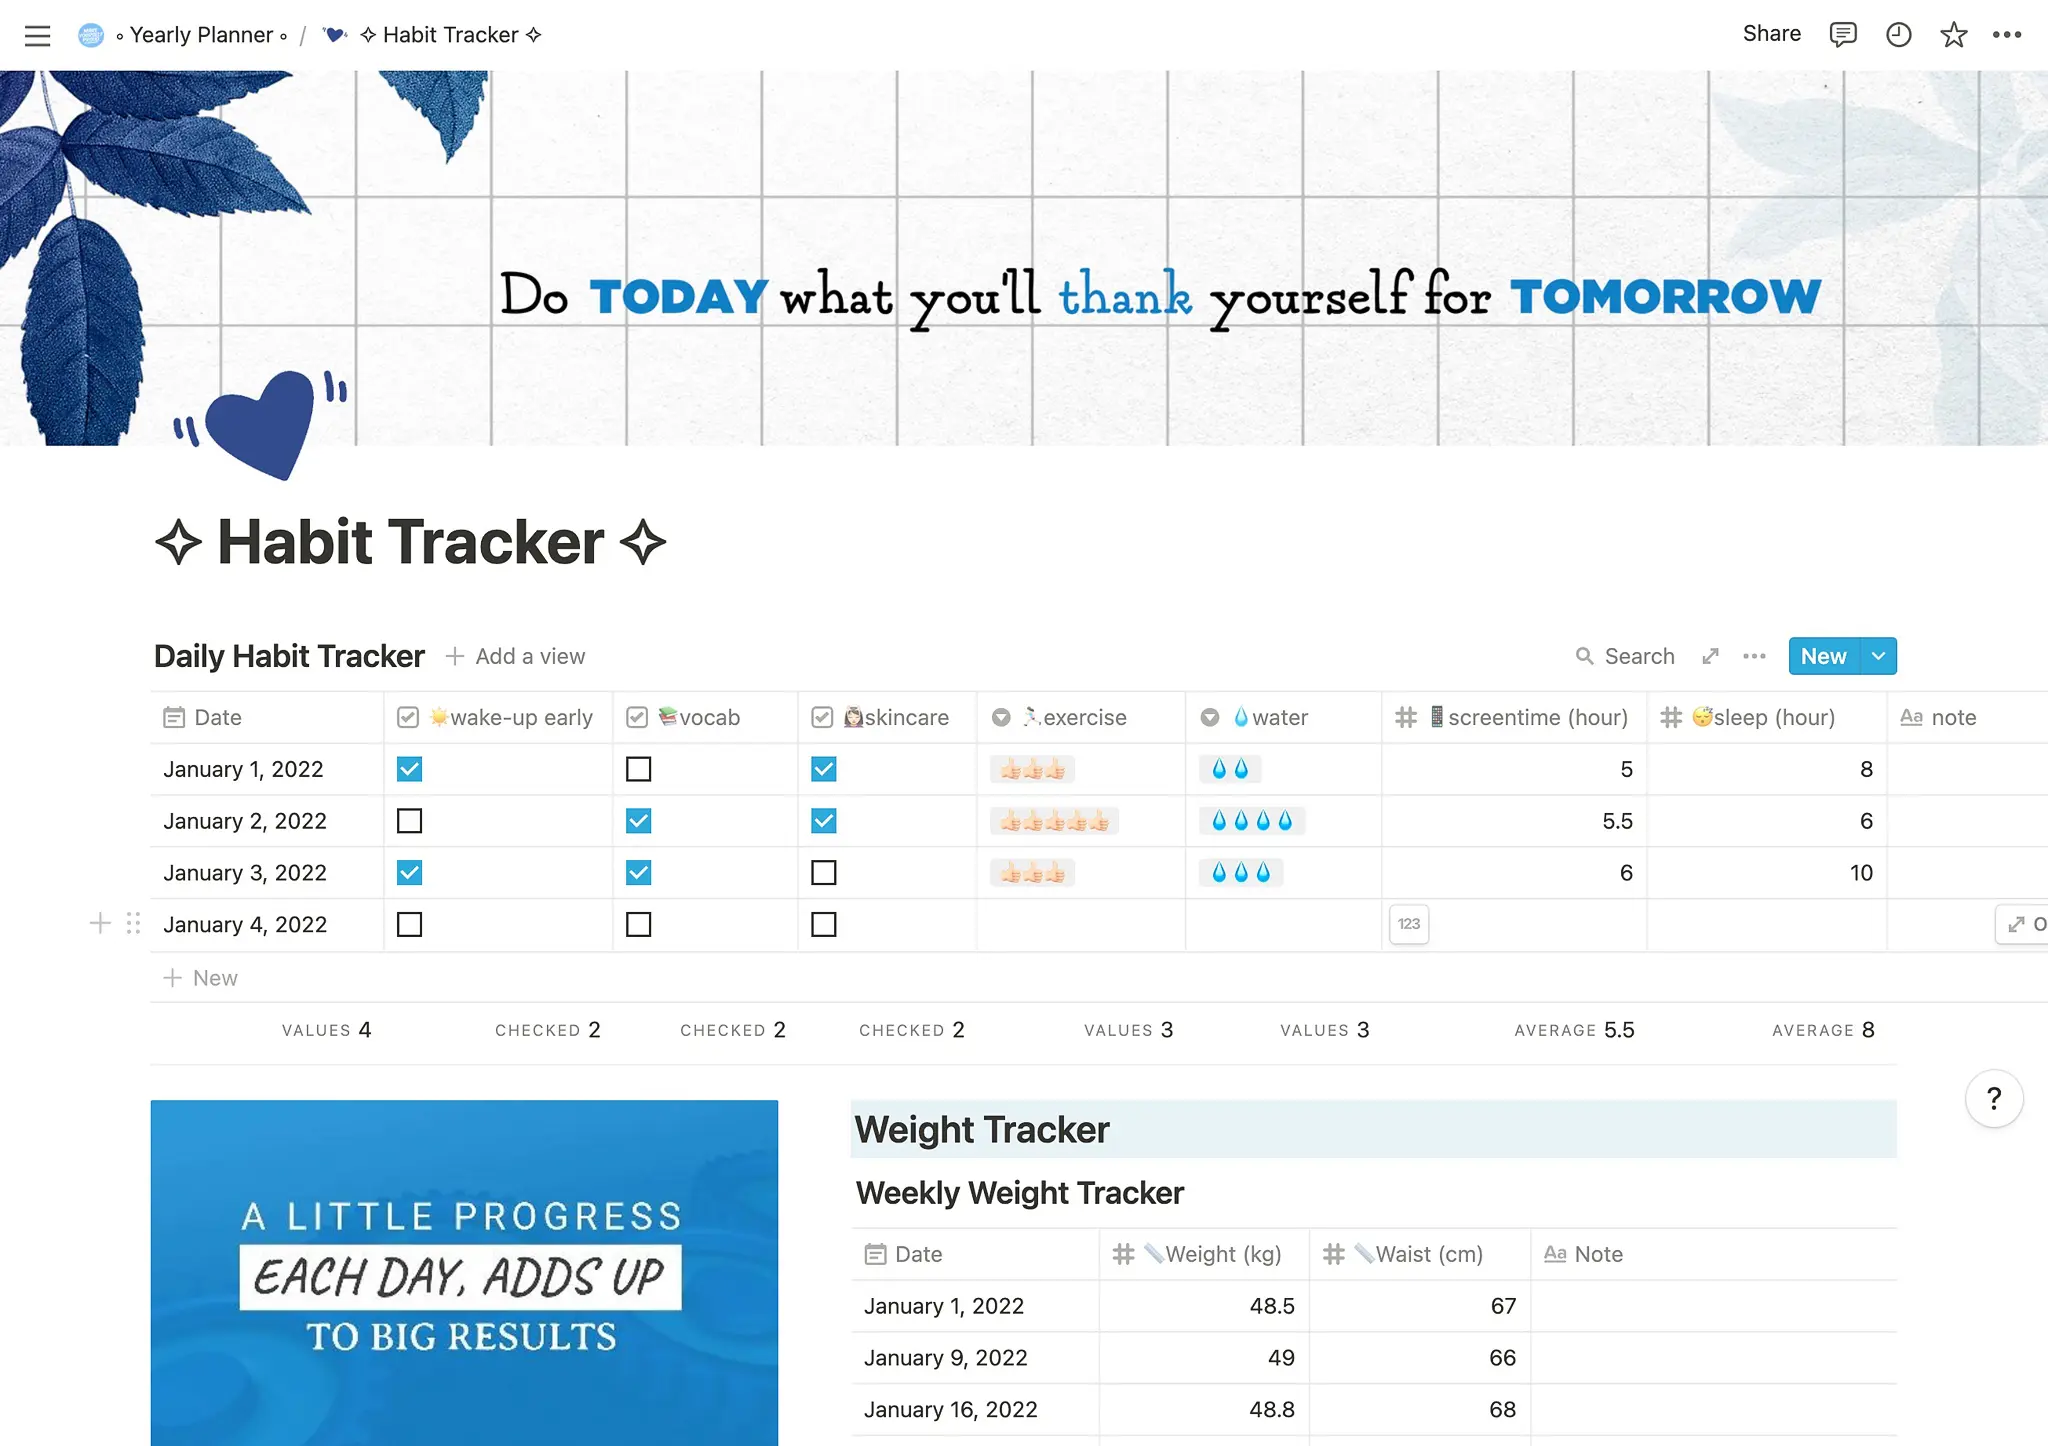 Planner and Tracker Dashboard image